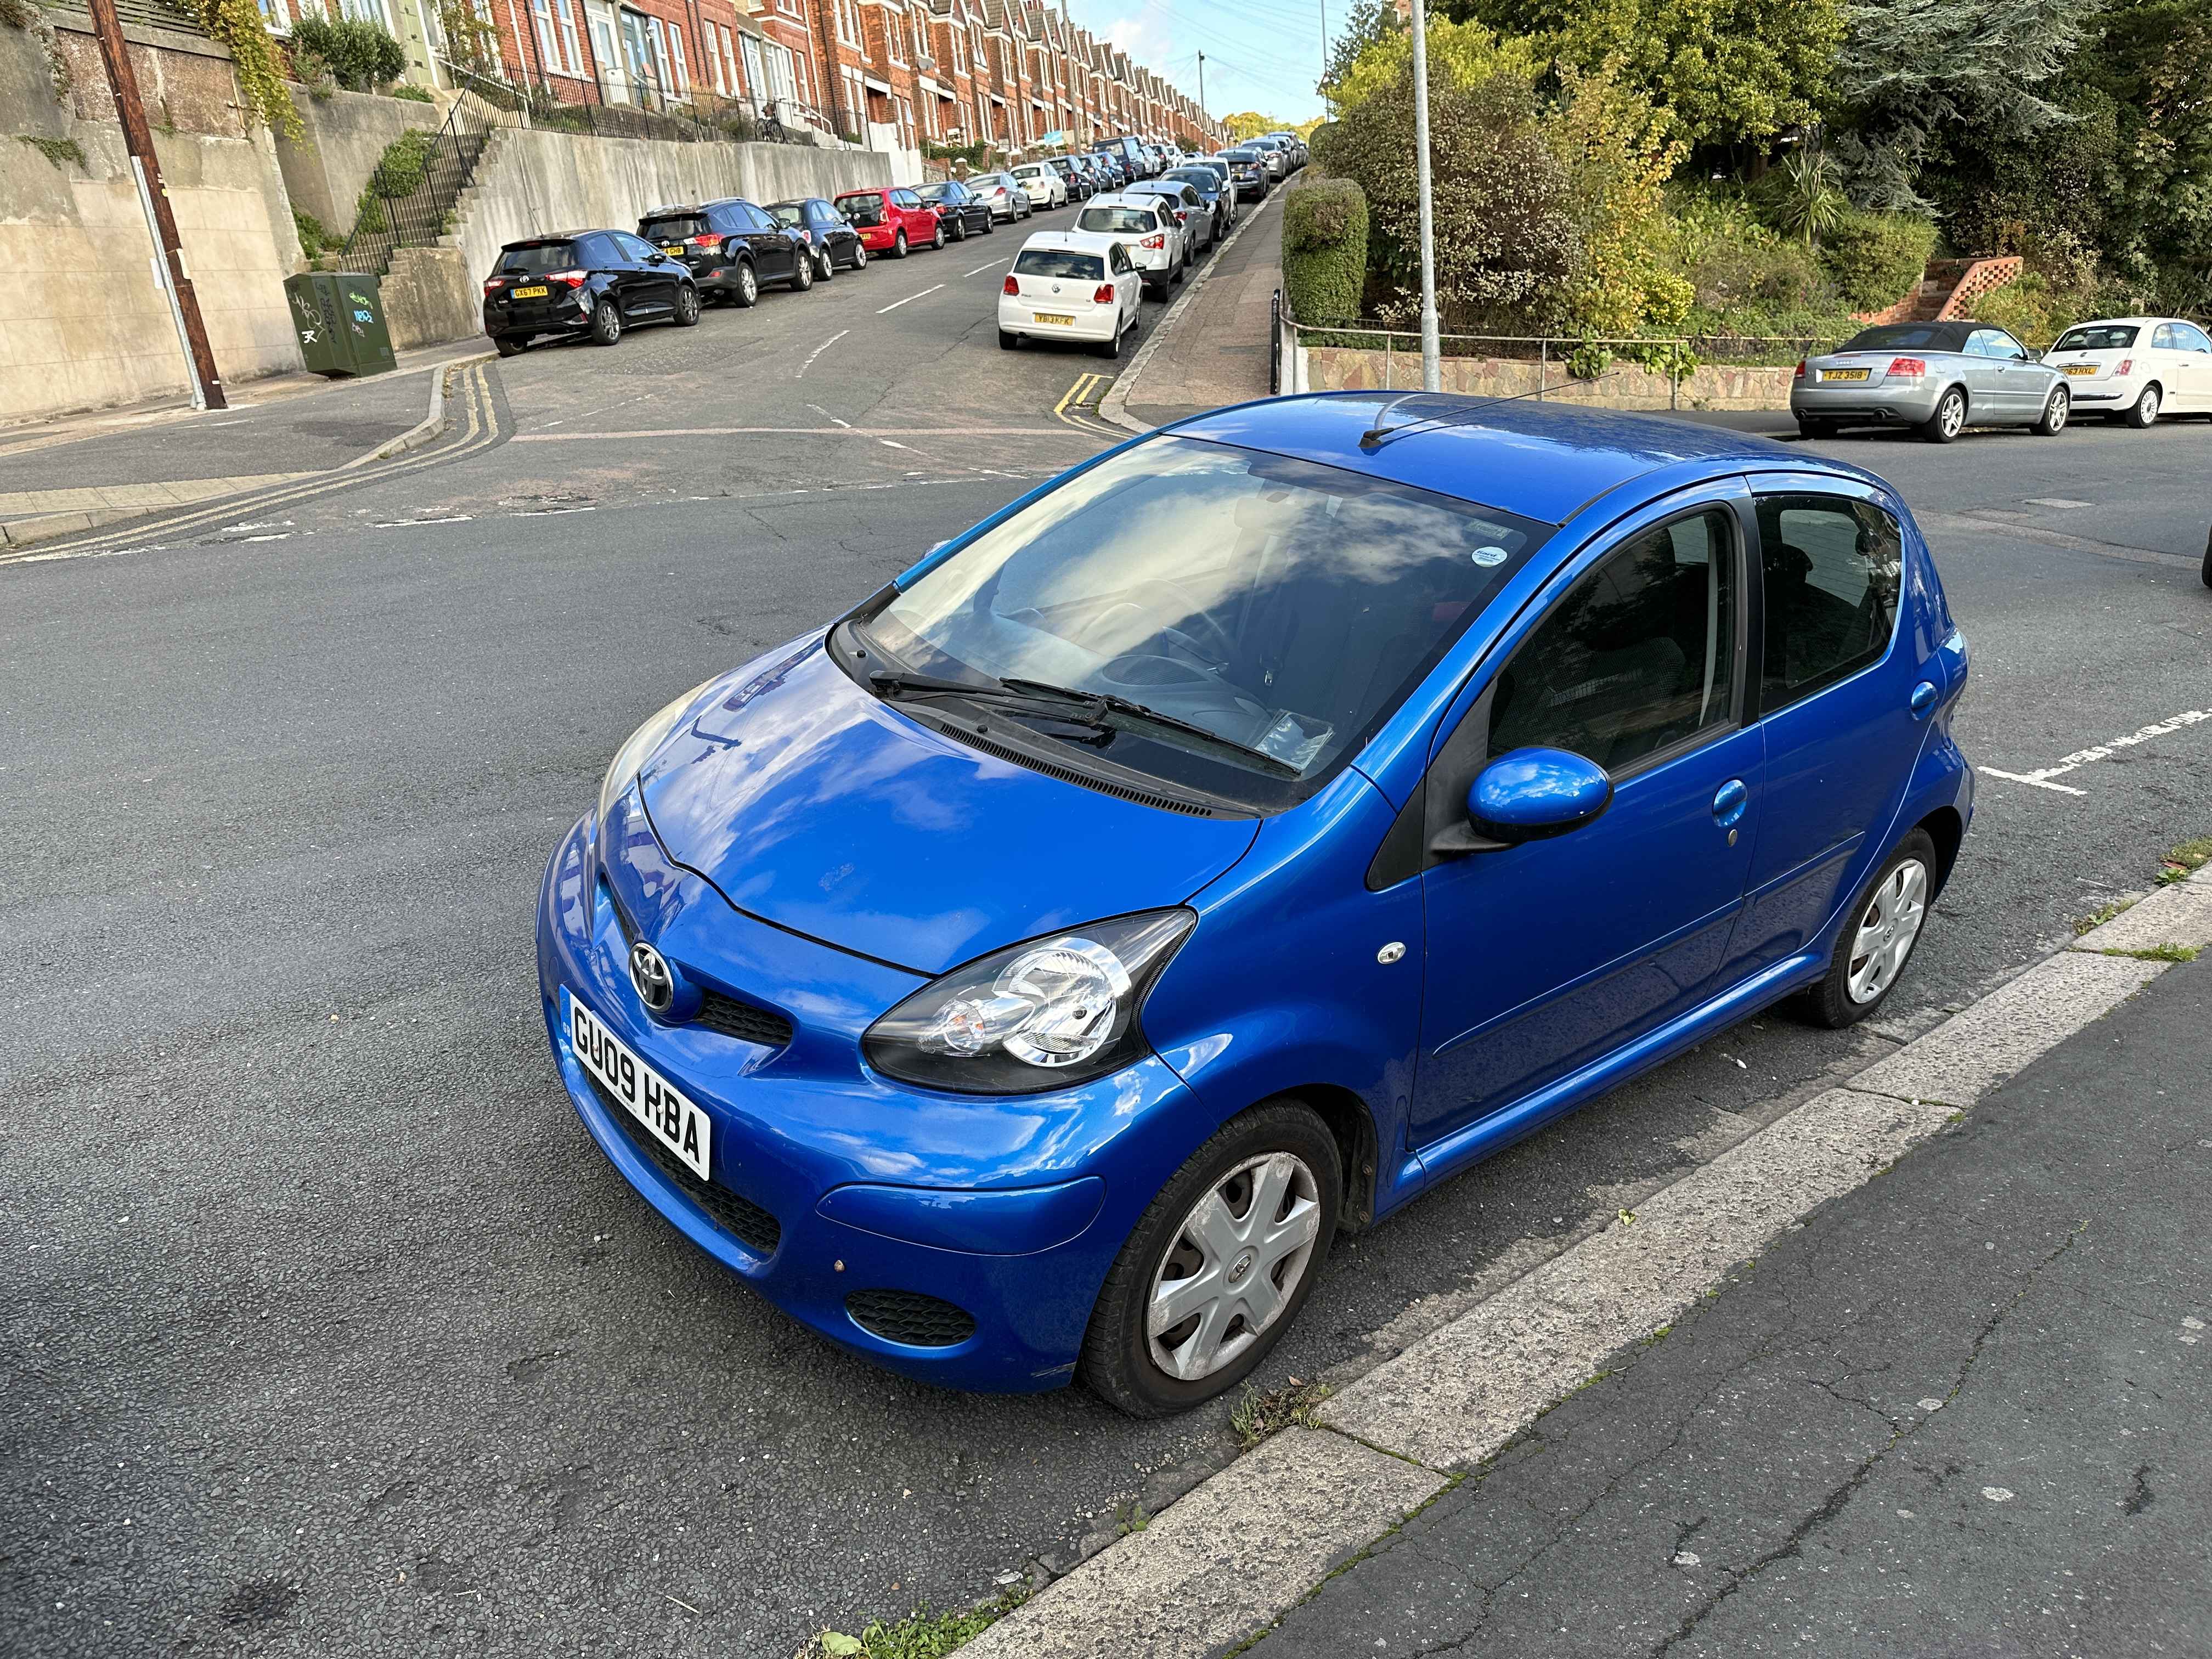 Photograph of GU09 HBA - a Blue Toyota Aygo parked in Hollingdean by a non-resident who uses the local area as part of their Brighton commute. The second of four photographs supplied by the residents of Hollingdean.